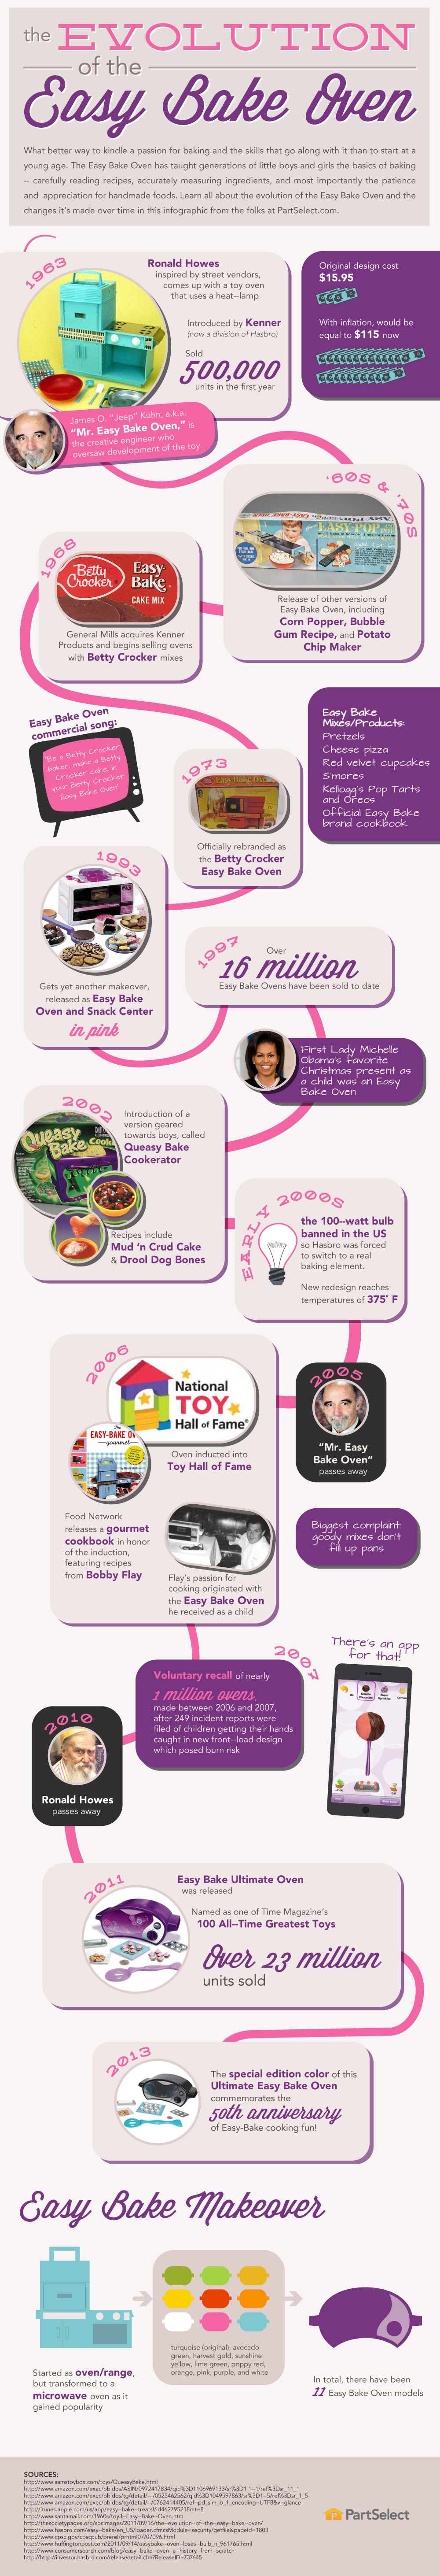 The Evolution of the Easy Bake Oven Infographic